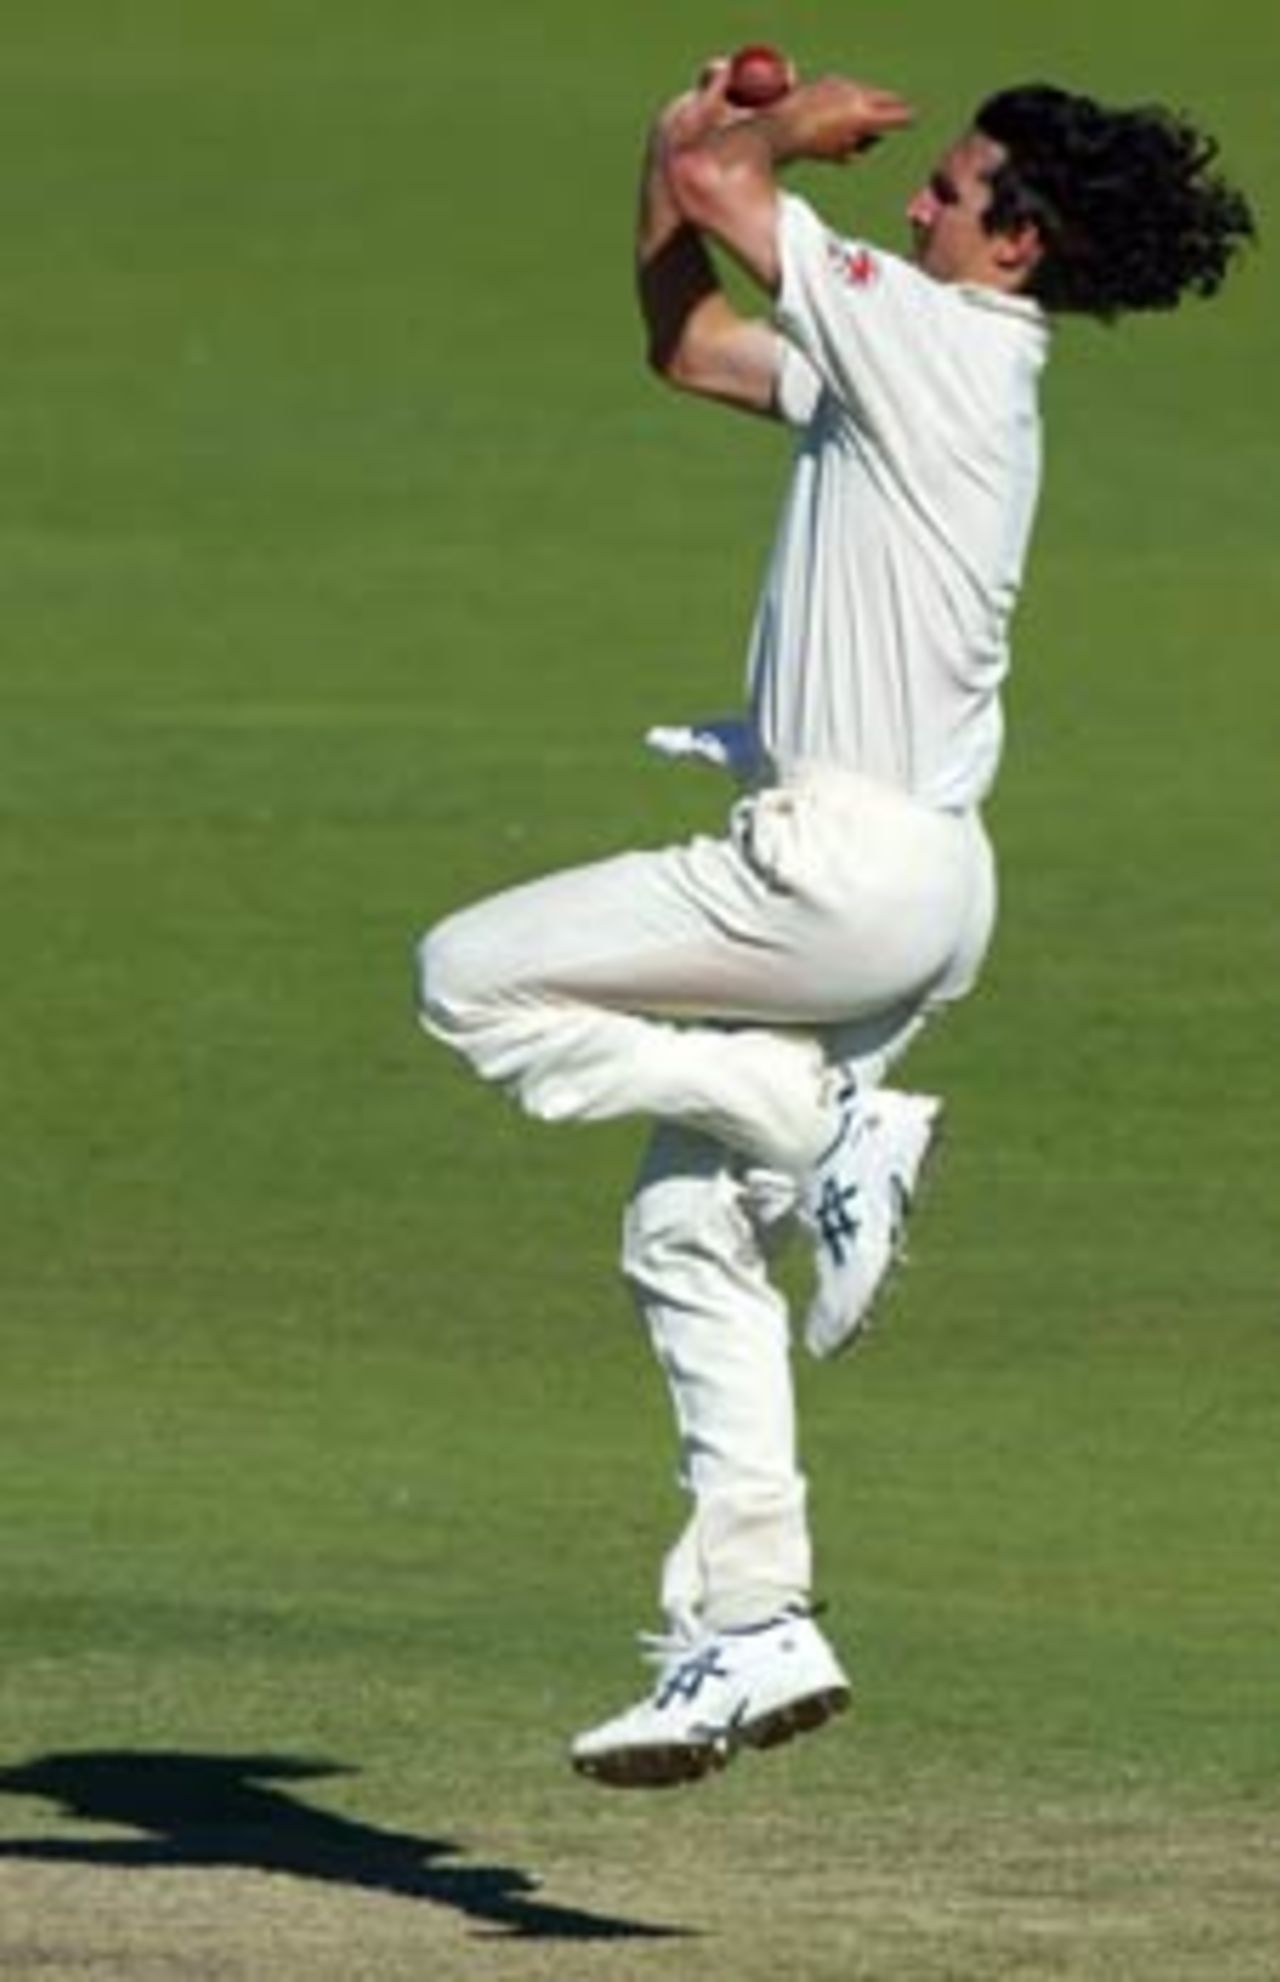 Gillespie charged in and gave his best, but it was not enough, Australia v India, 2nd Test, Adelaide, 3rd day, December 14, 2003